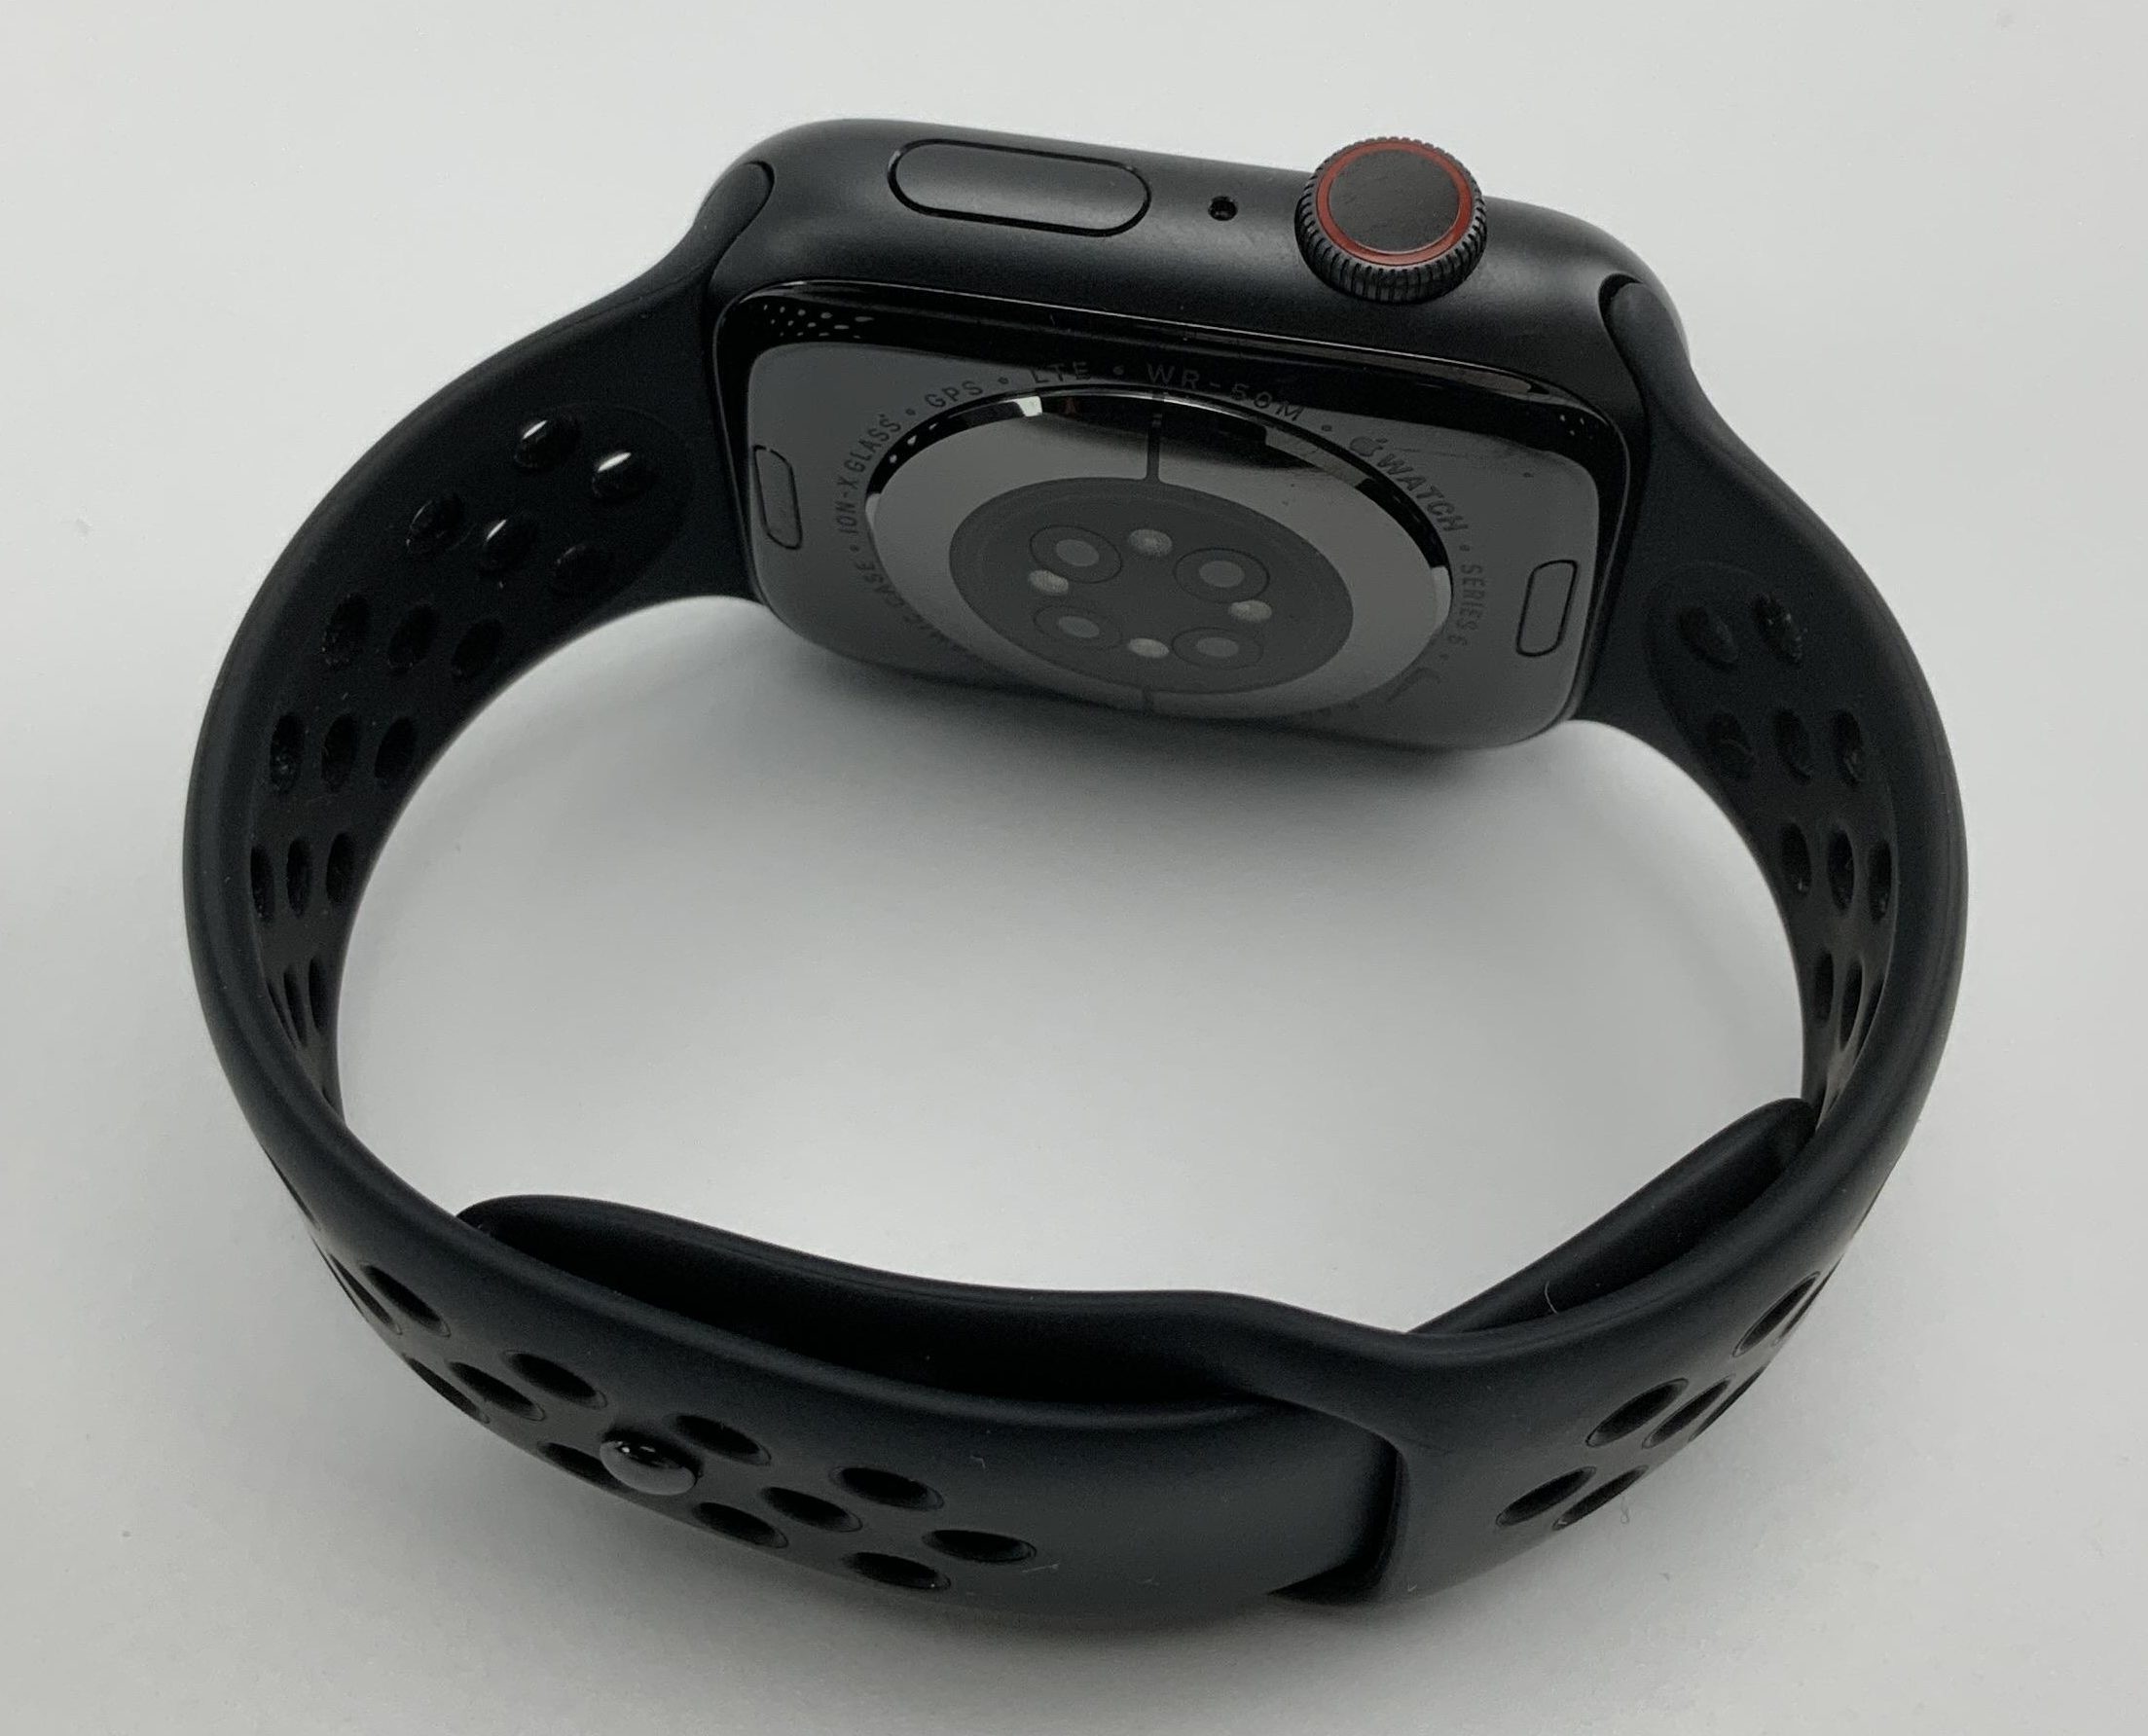 Watch Series 6 Aluminum Cellular (44mm), Space Gray, image 3